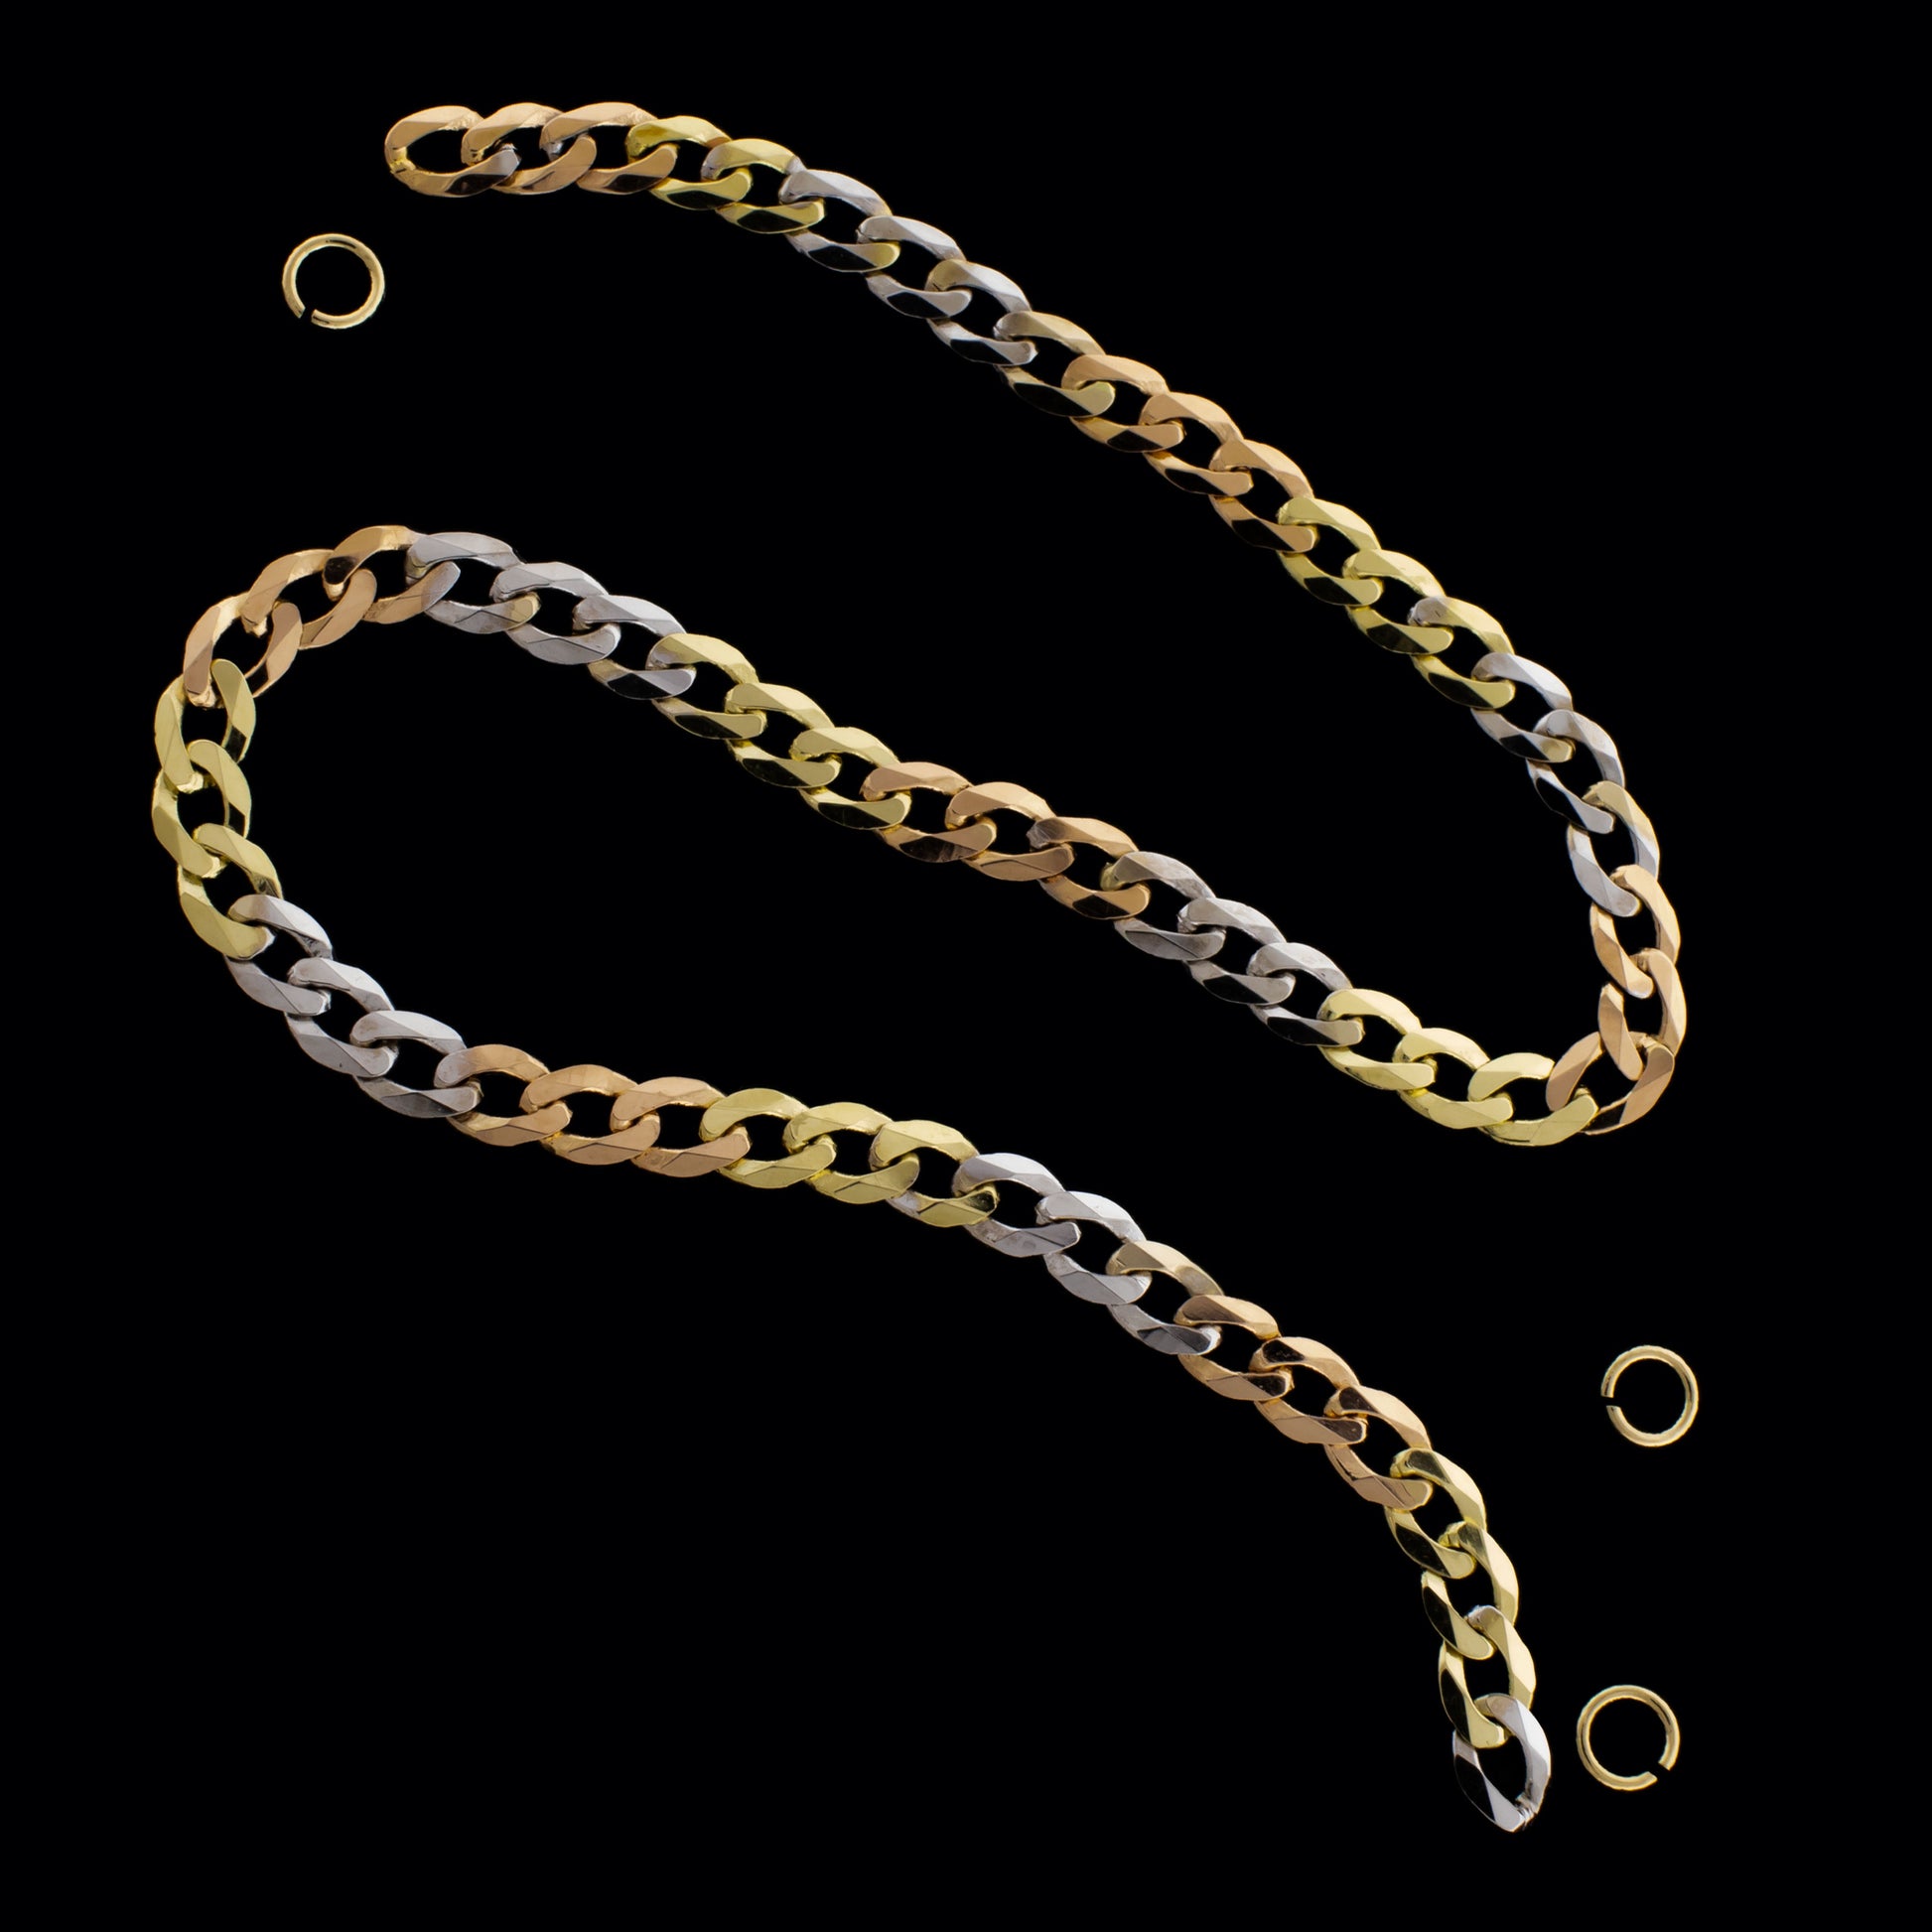 6" 14KT Tri-Colored Gold Light Curb Chain 2.8mm - Khrysos Jewelry